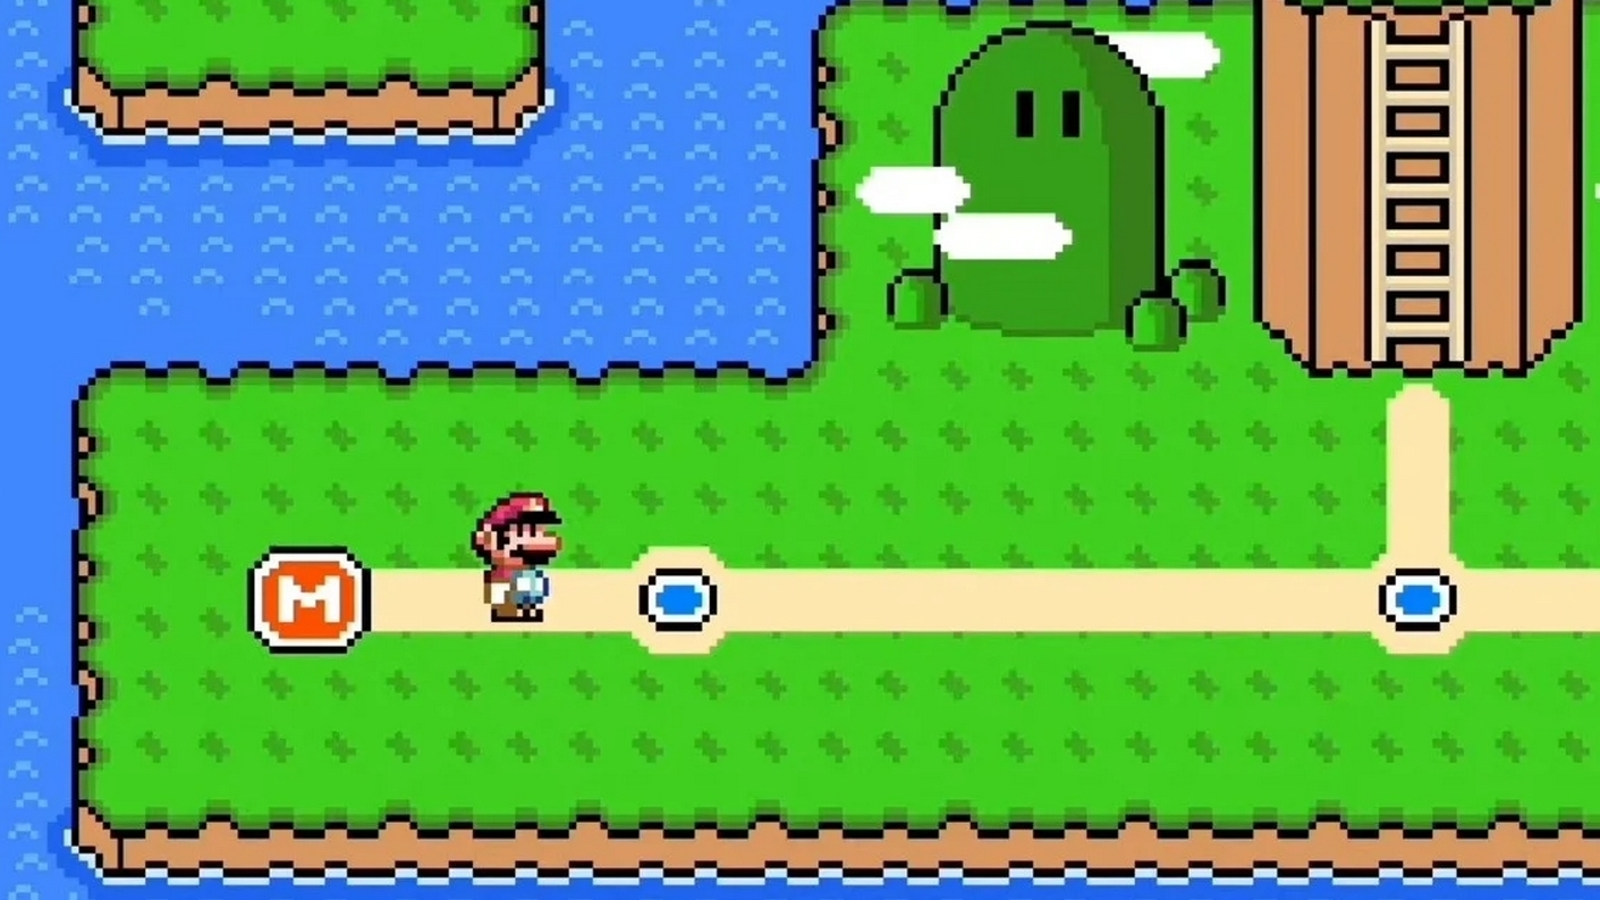 Play Super Mario World (USA) for free without downloads